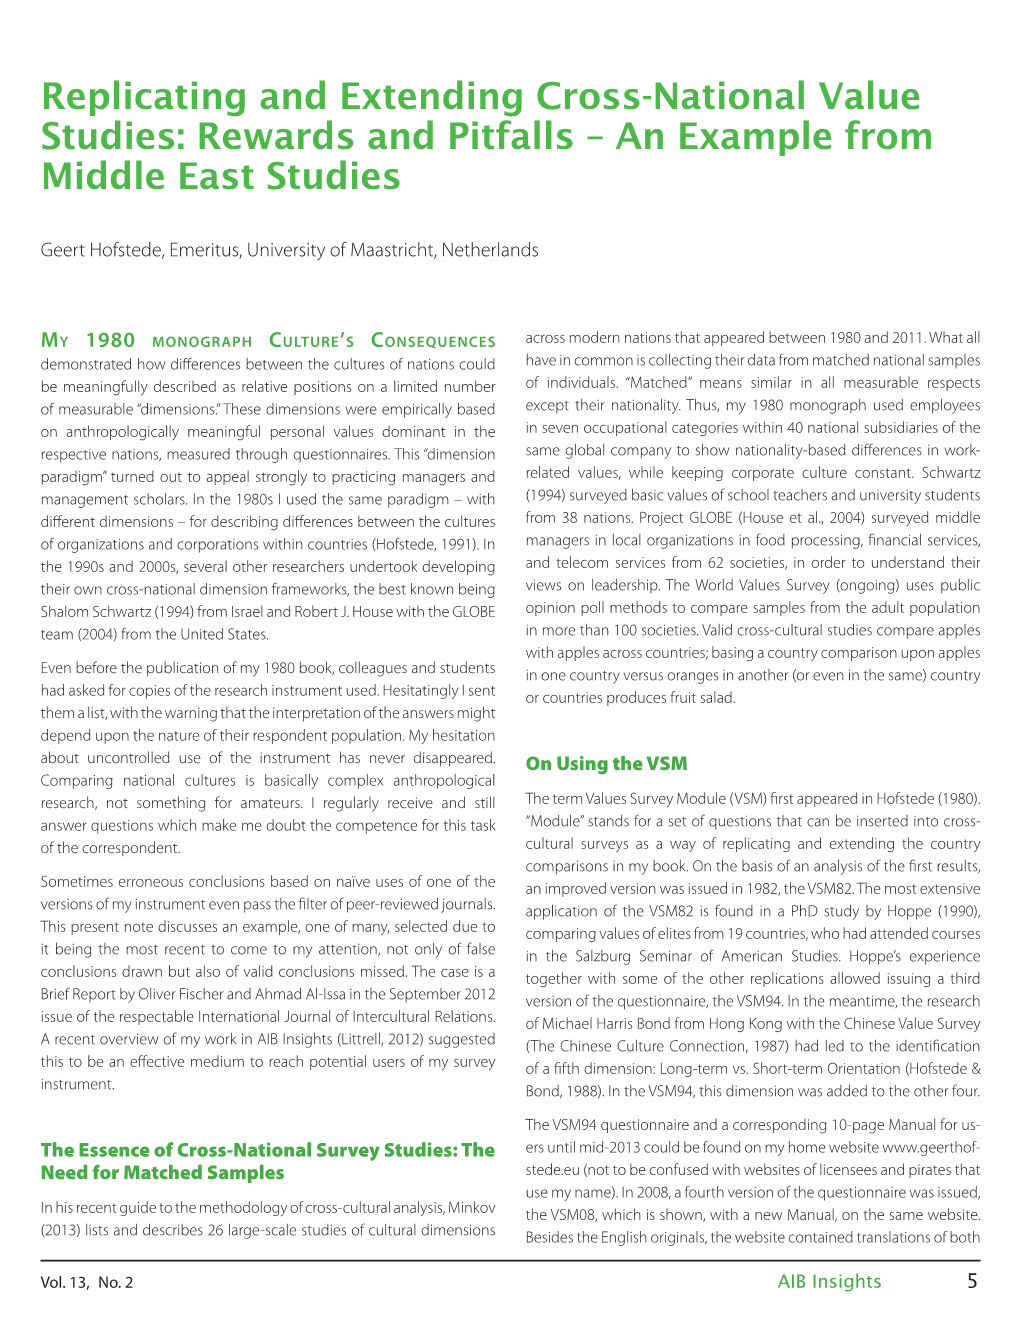 Replicating and Extending Cross-National Value Studies: Rewards and Pitfalls – an Example from Middle East Studies